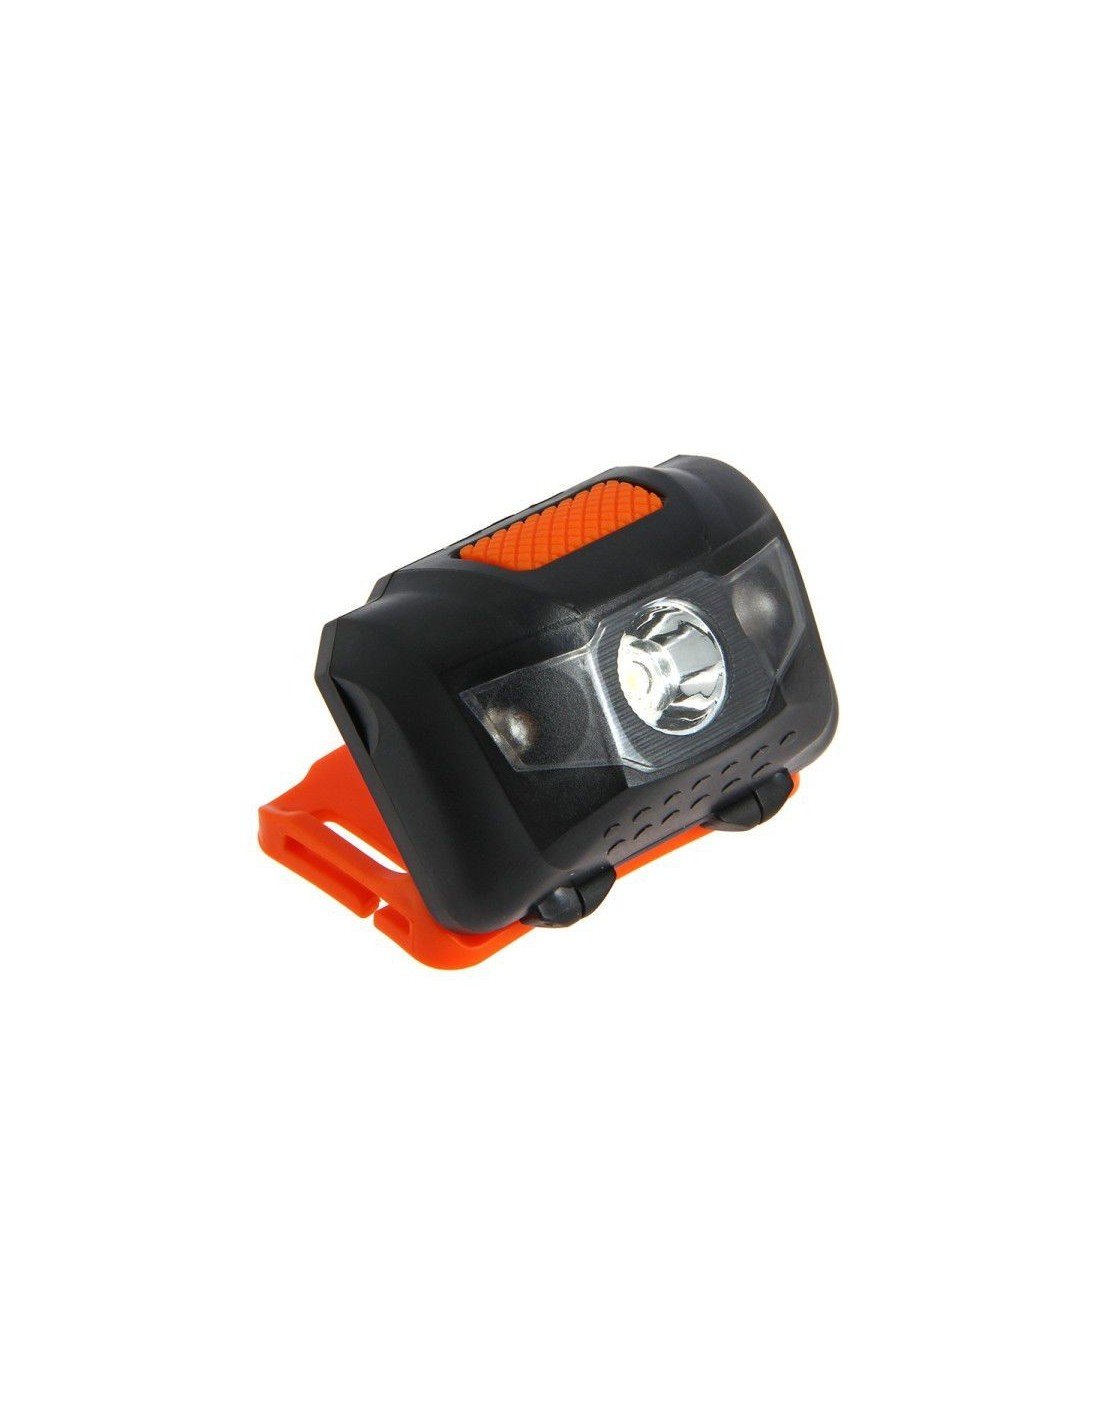 NGT LED Headlight with White and Red Light (100 lumens) челник